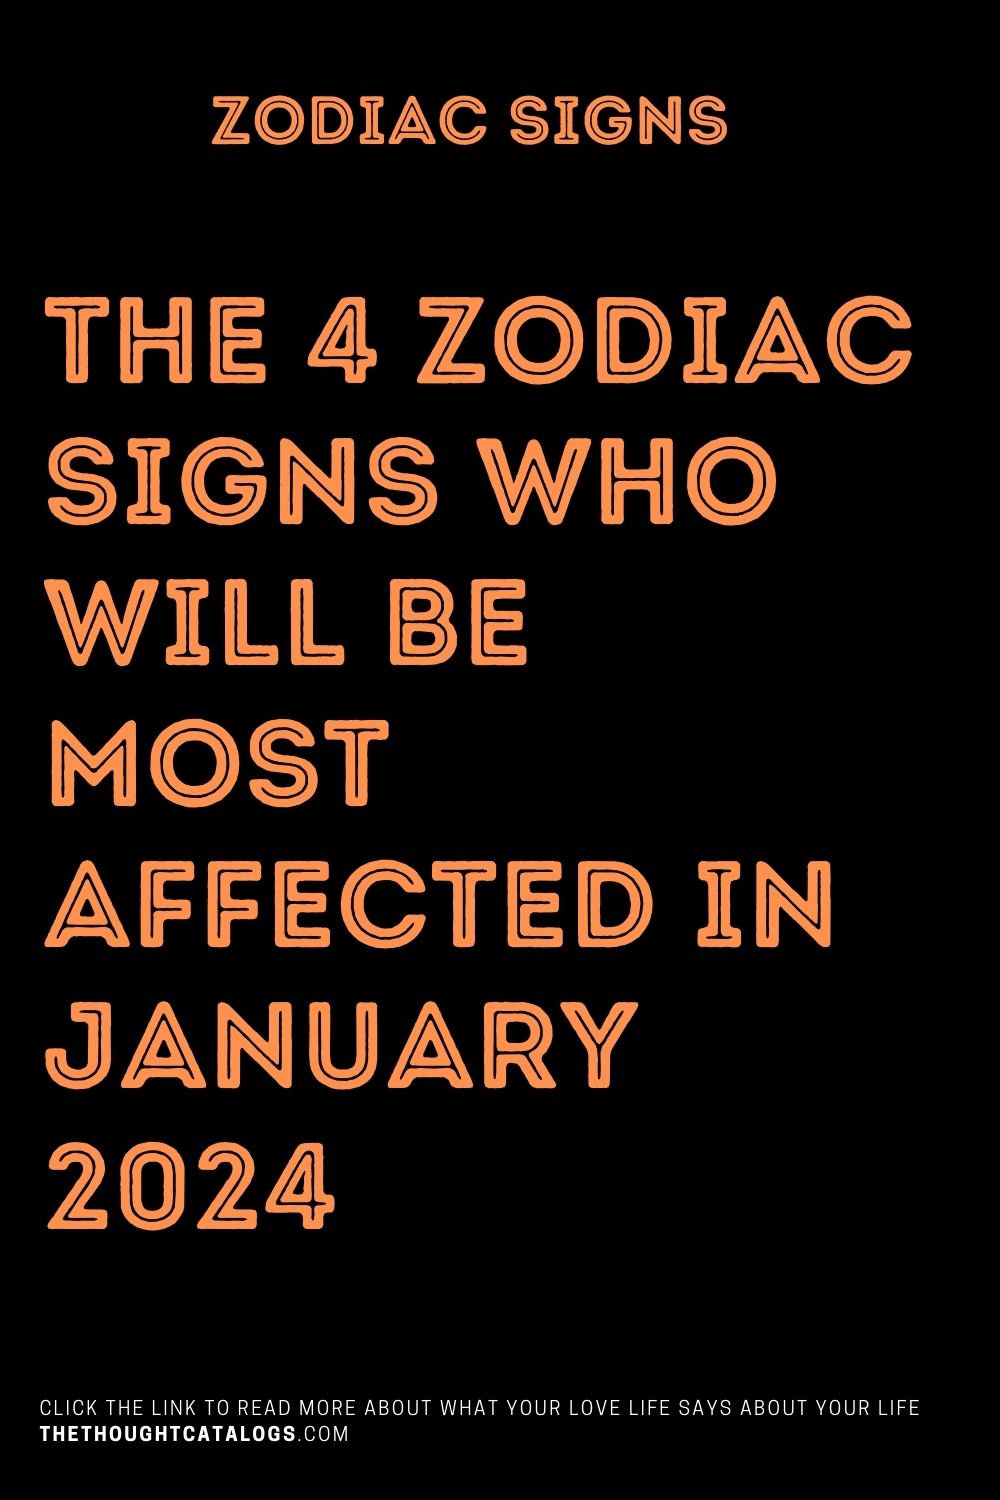 The 4 Zodiac Signs Who Will Be Most Affected In January 2024